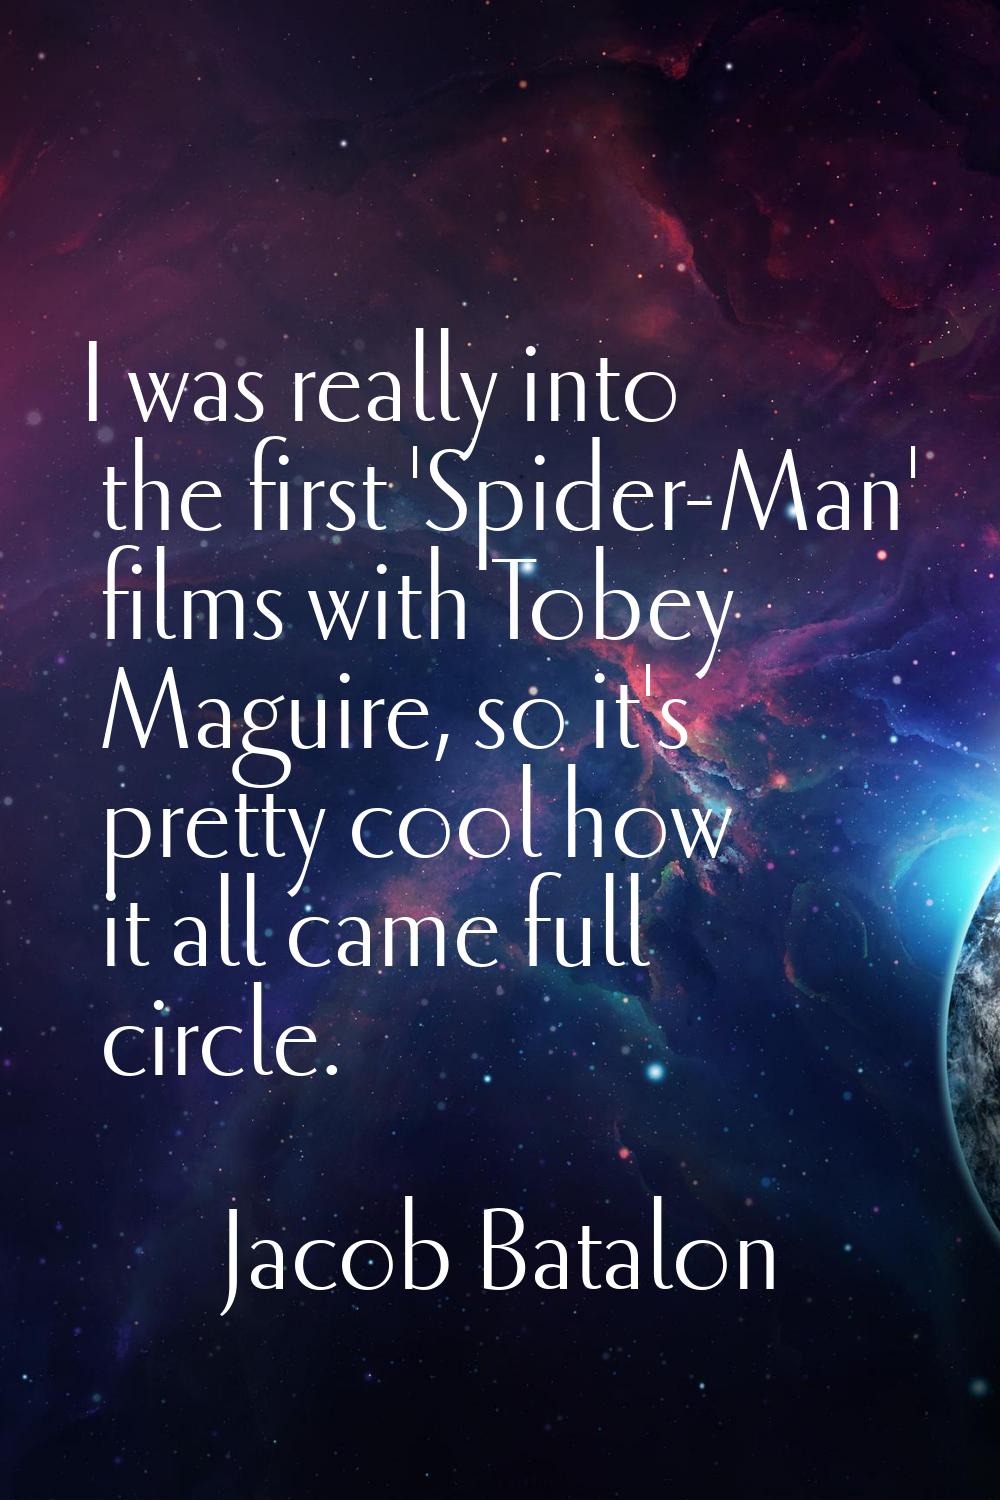 I was really into the first 'Spider-Man' films with Tobey Maguire, so it's pretty cool how it all c